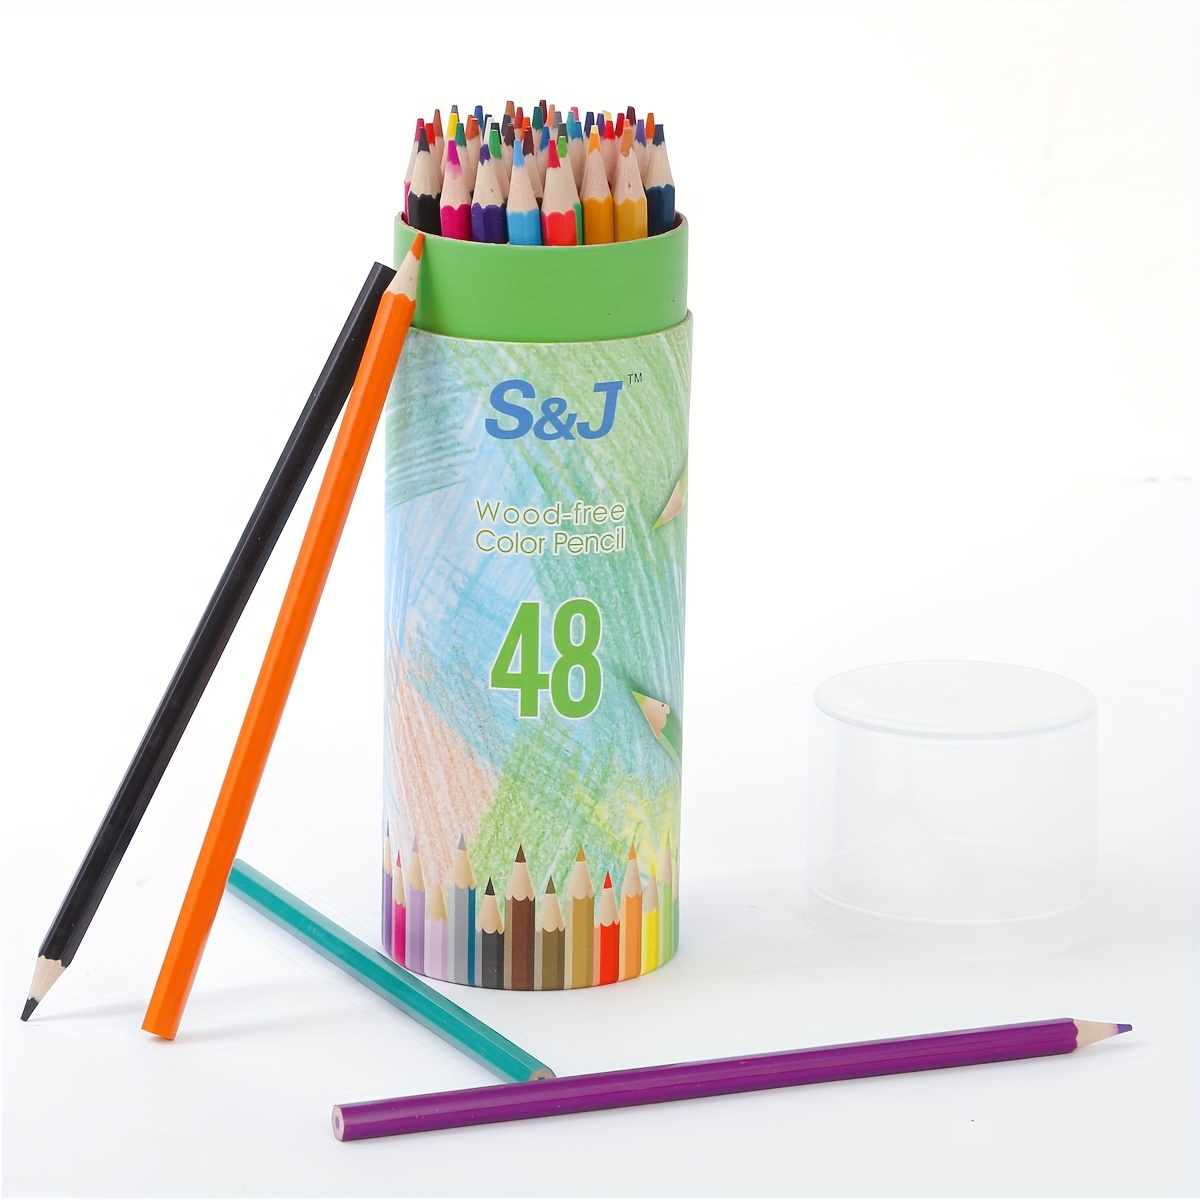 Sketching pencil set 53 pencils including two sketchbooks A4 and